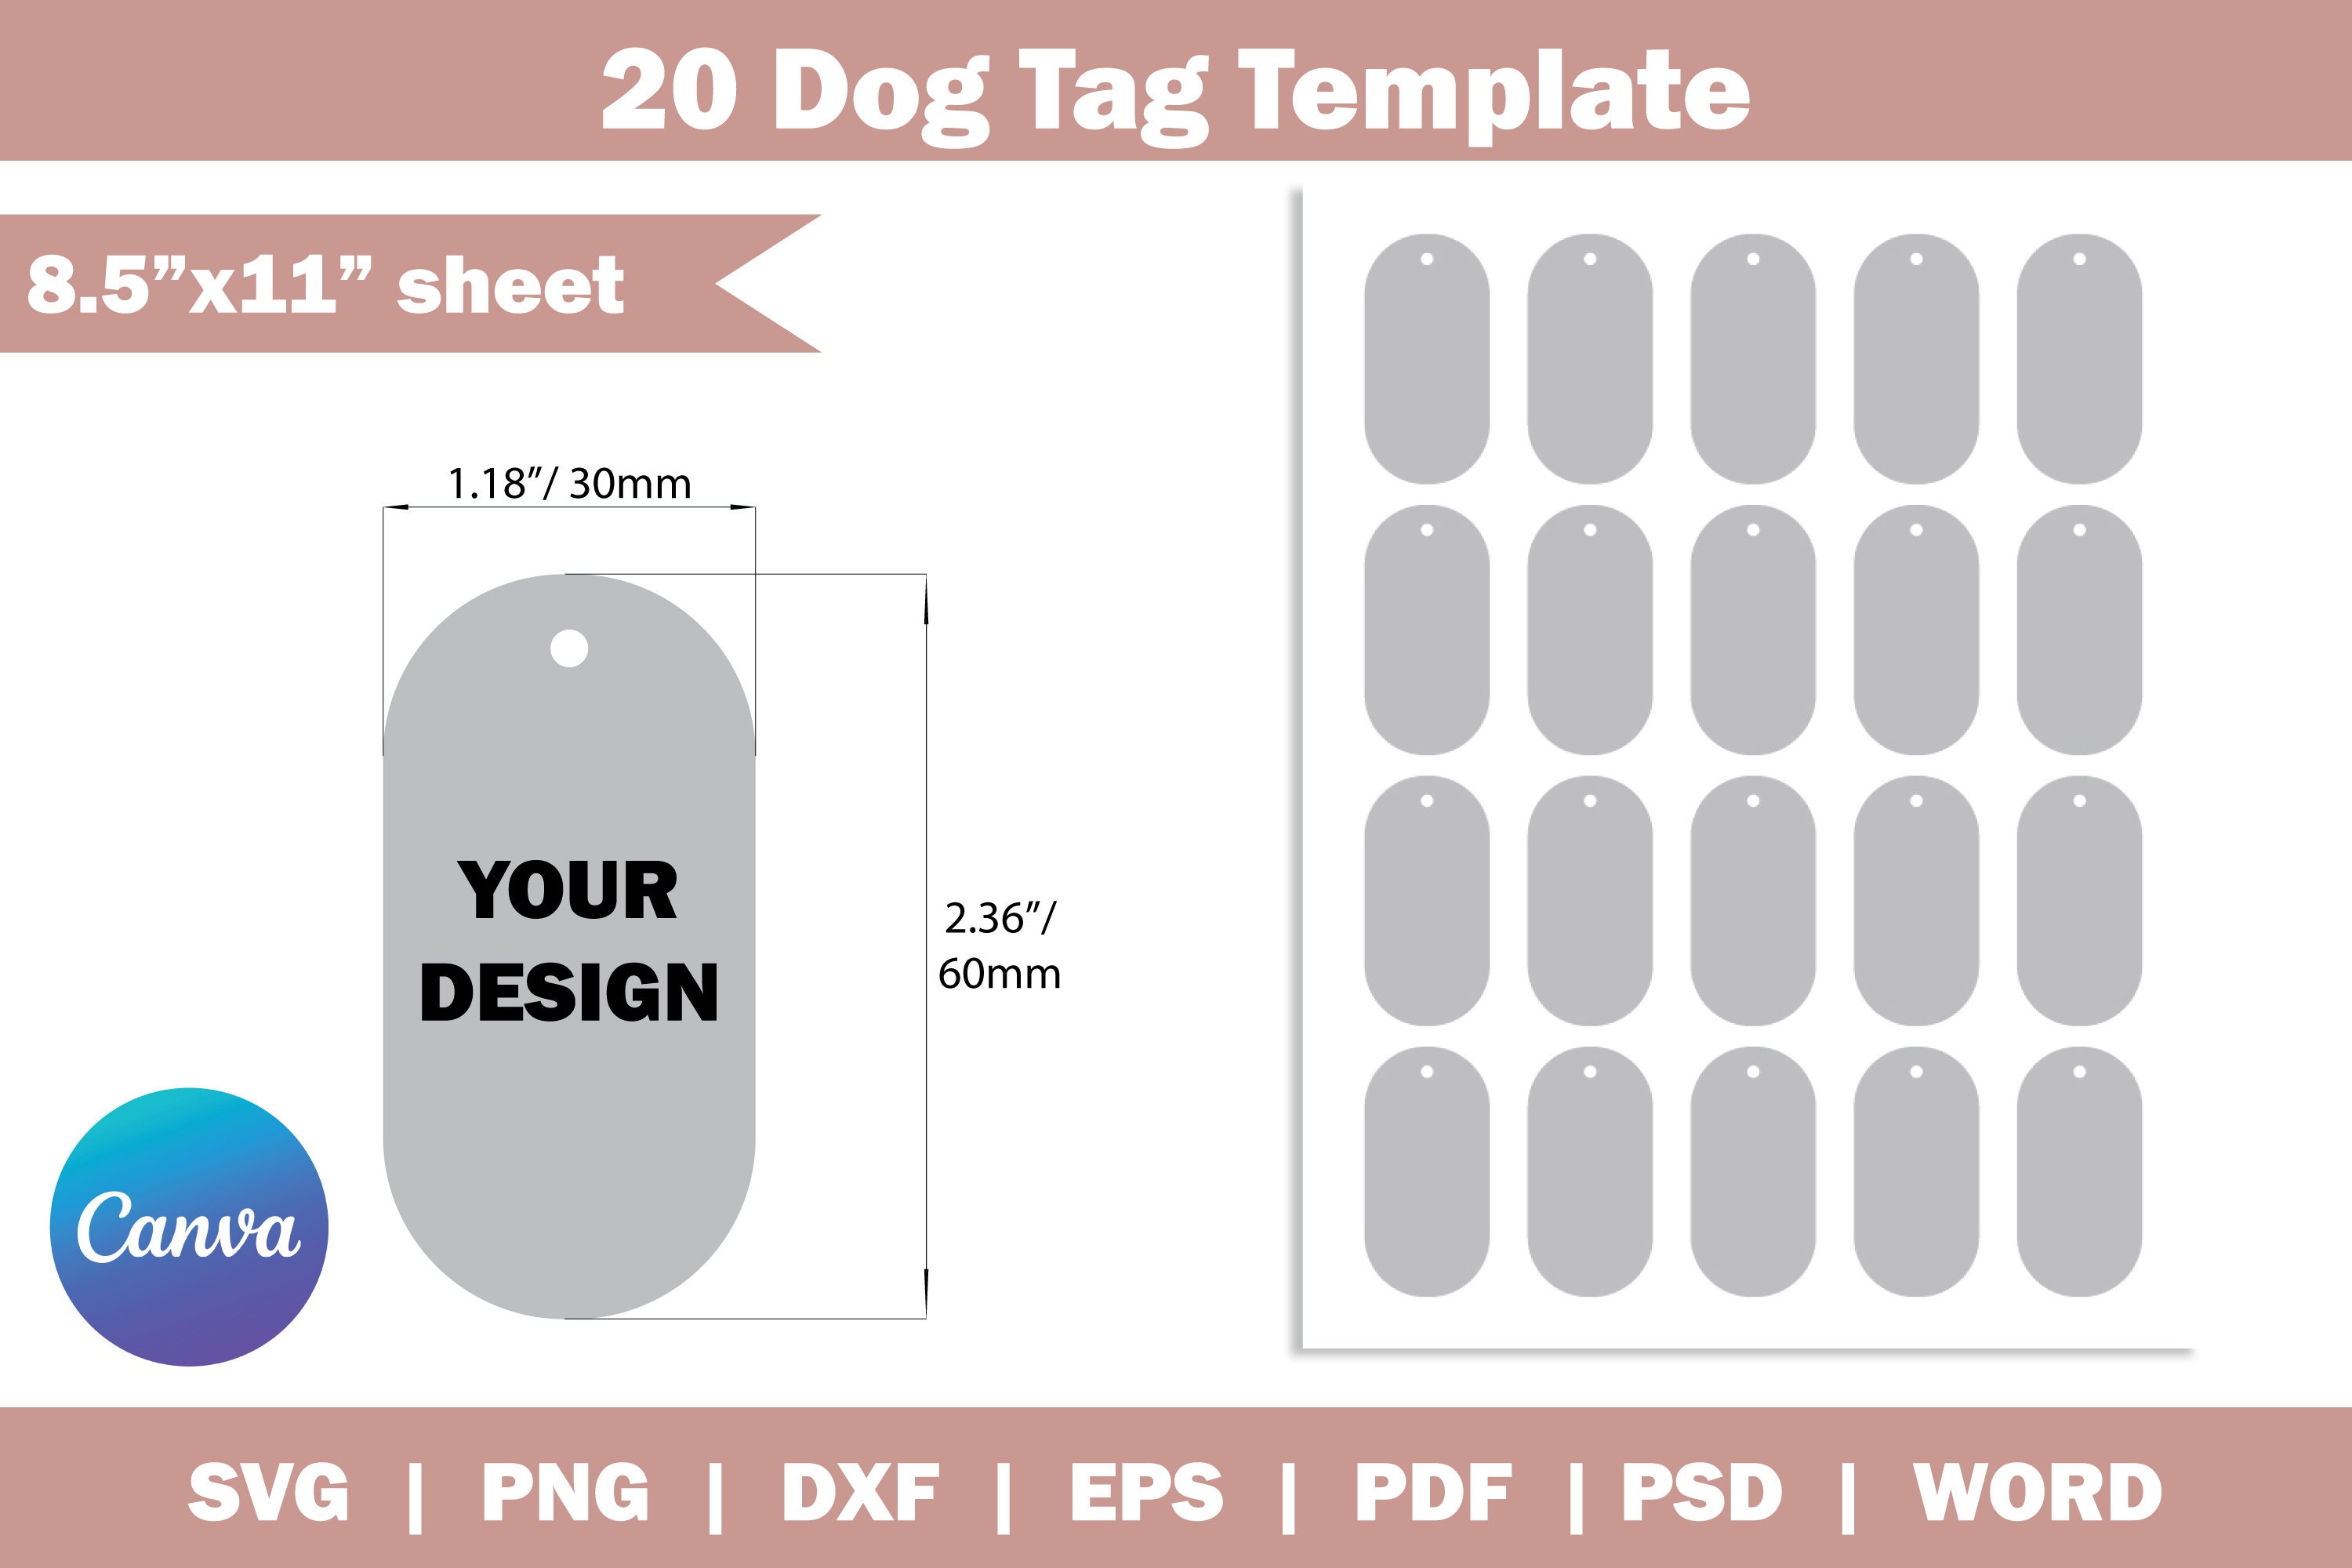 Blank Dog Tags - 10pcs Double Sided Sublimation Dog Tags Blanks Bone Shape  Pet Tags for Cats, Dogs, DIY Crafts, Key Chains, Engraving, Embossing (1.97